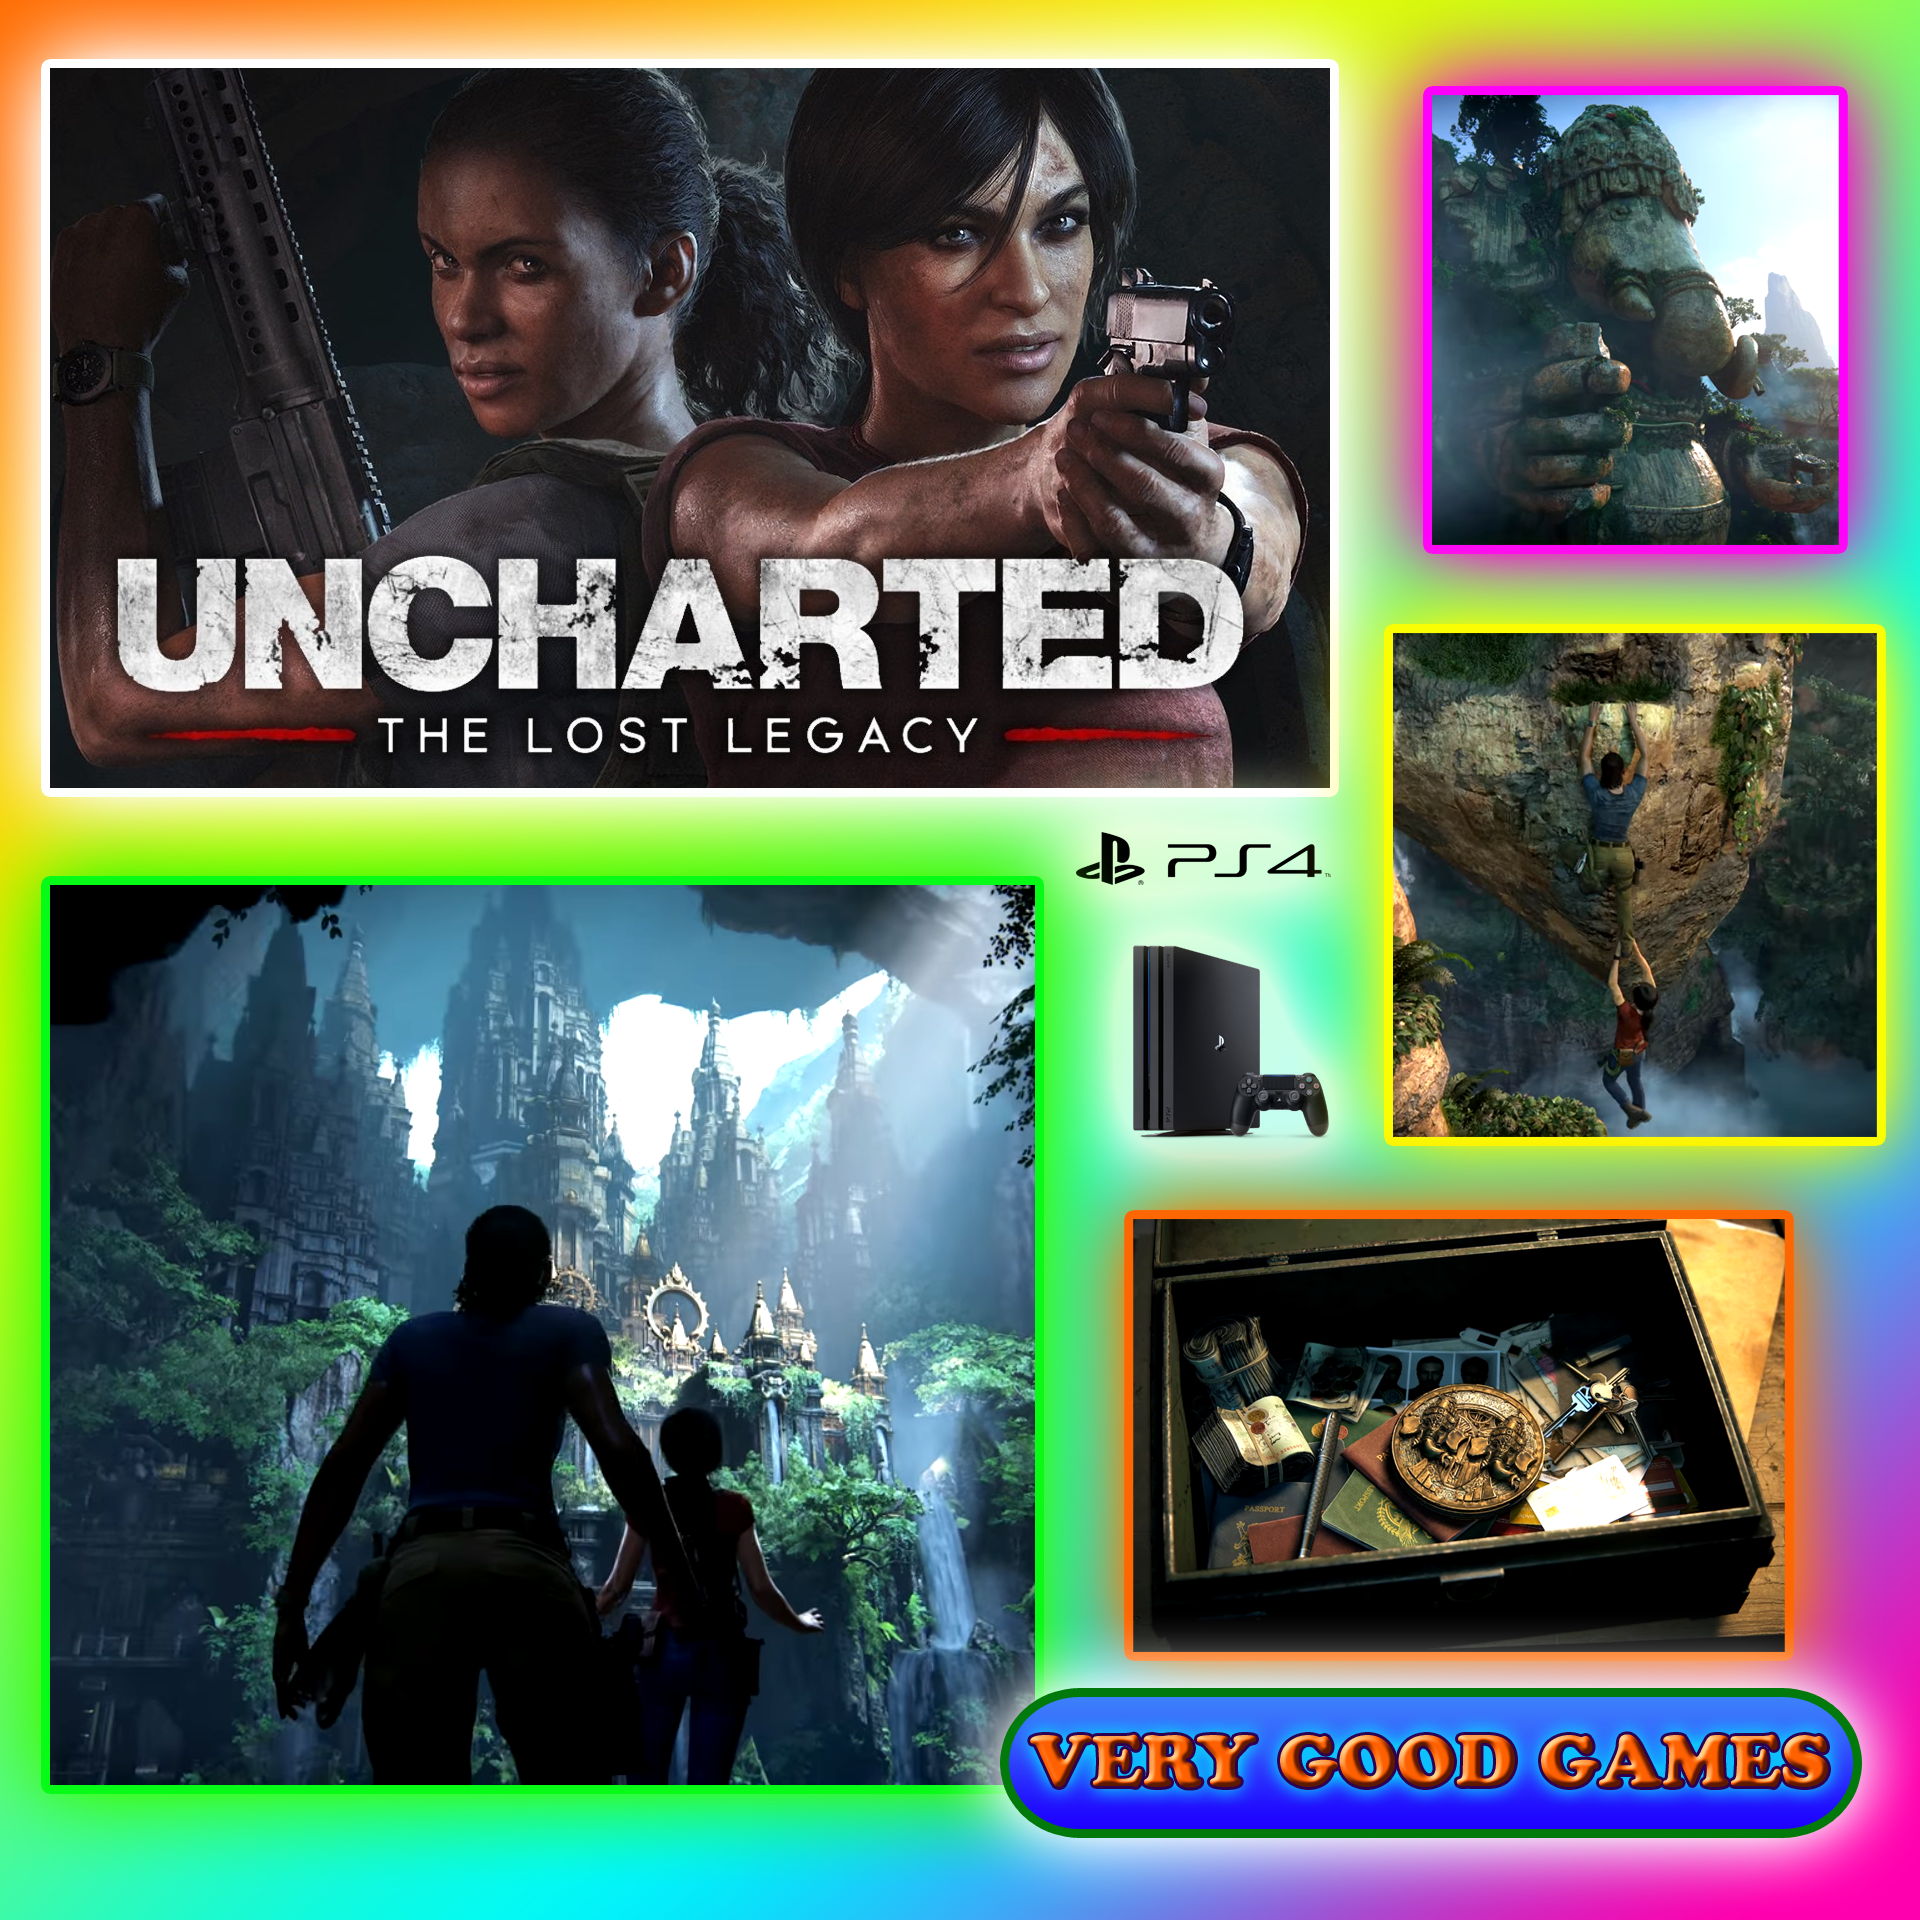 A review of Uncharted: The Lost Legacy on the gaming blog Very Good Games